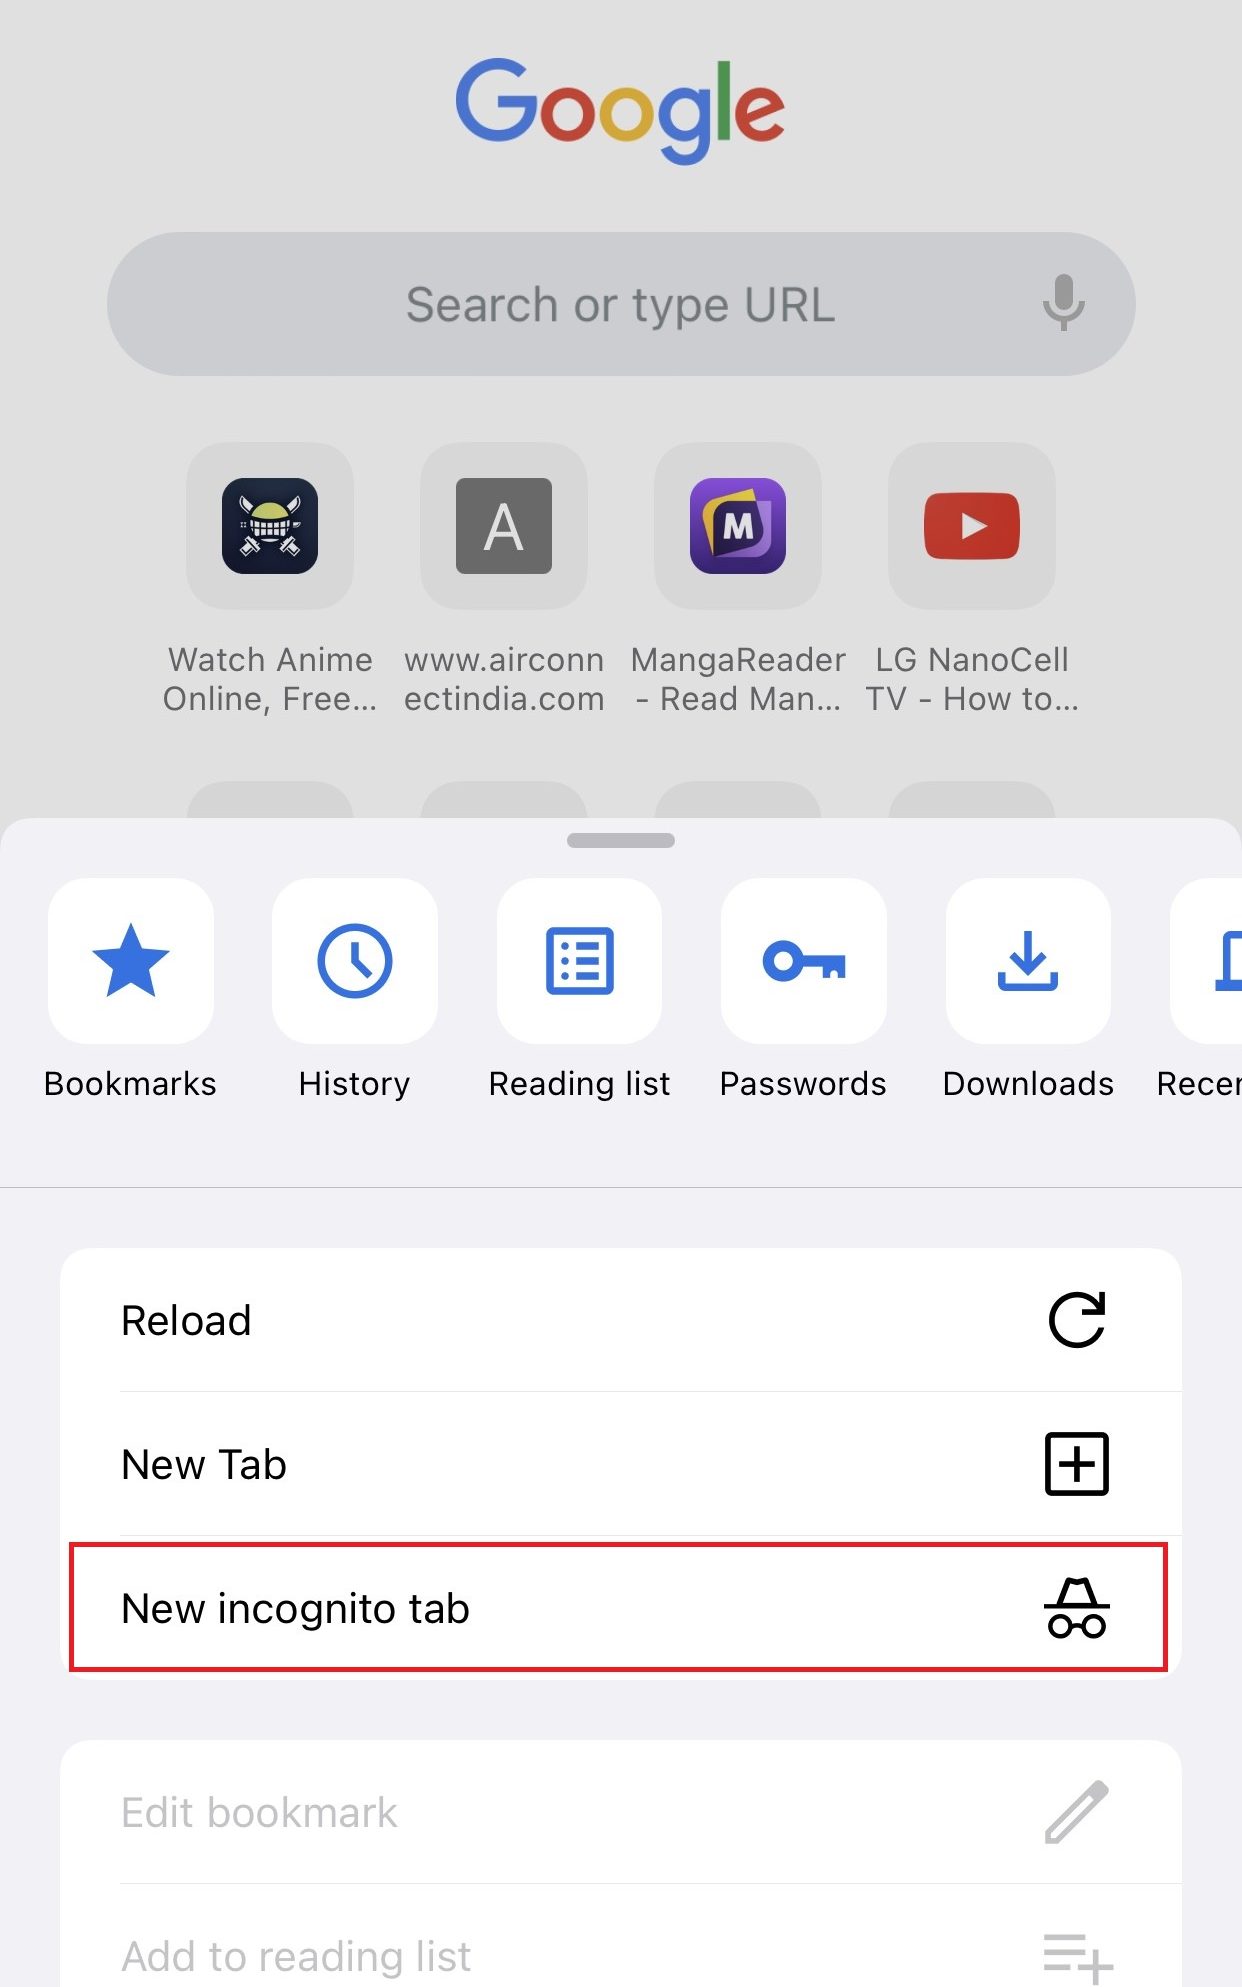 Tap on New incognito tab to open safe mode on chrome